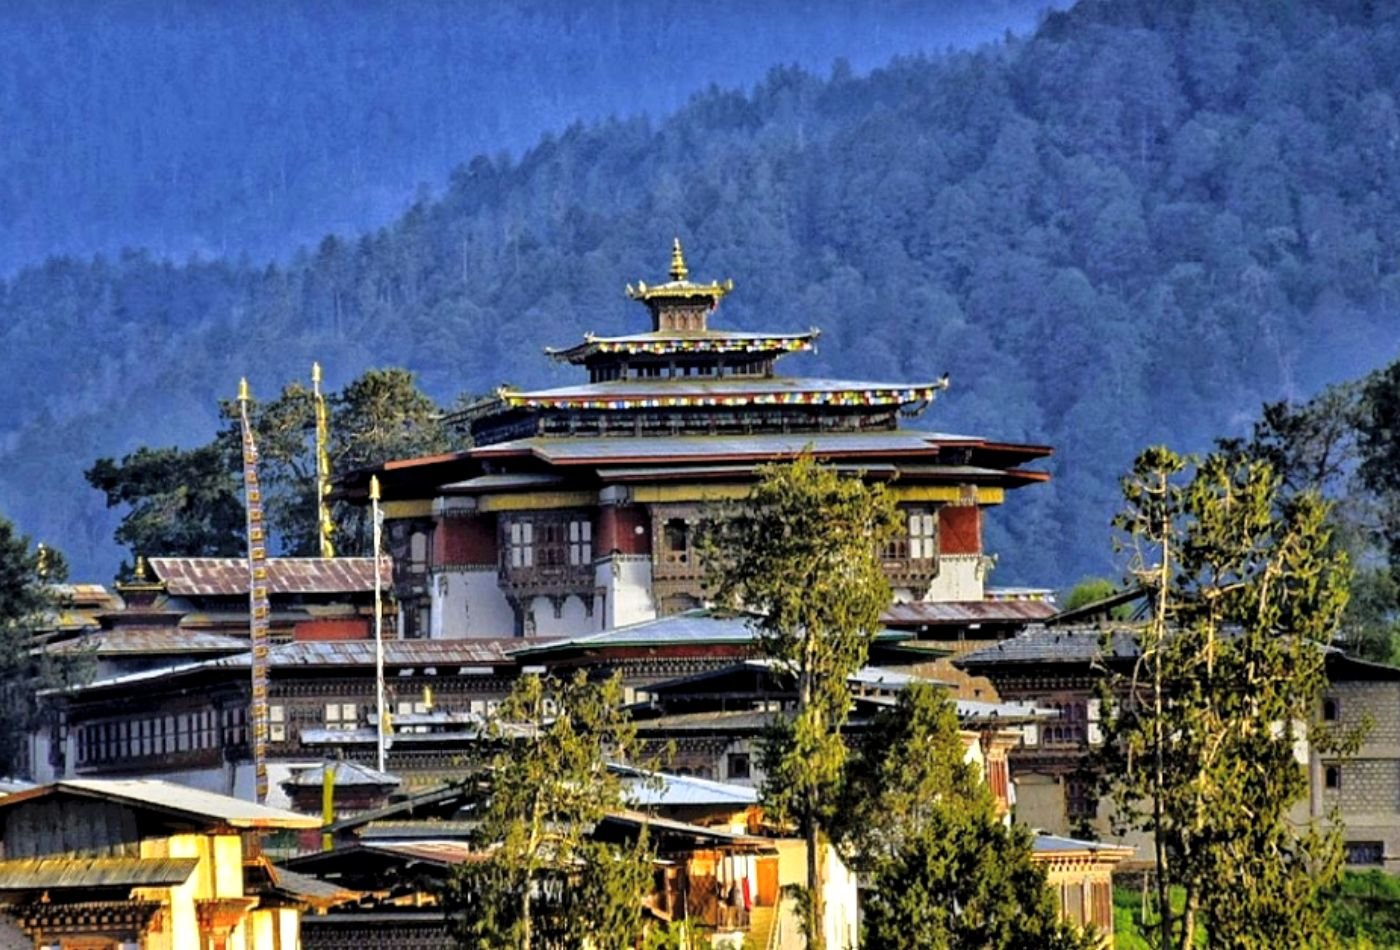 A picture of the Gangtey Monastery, featuring its red roof and the lush green forest in the background.